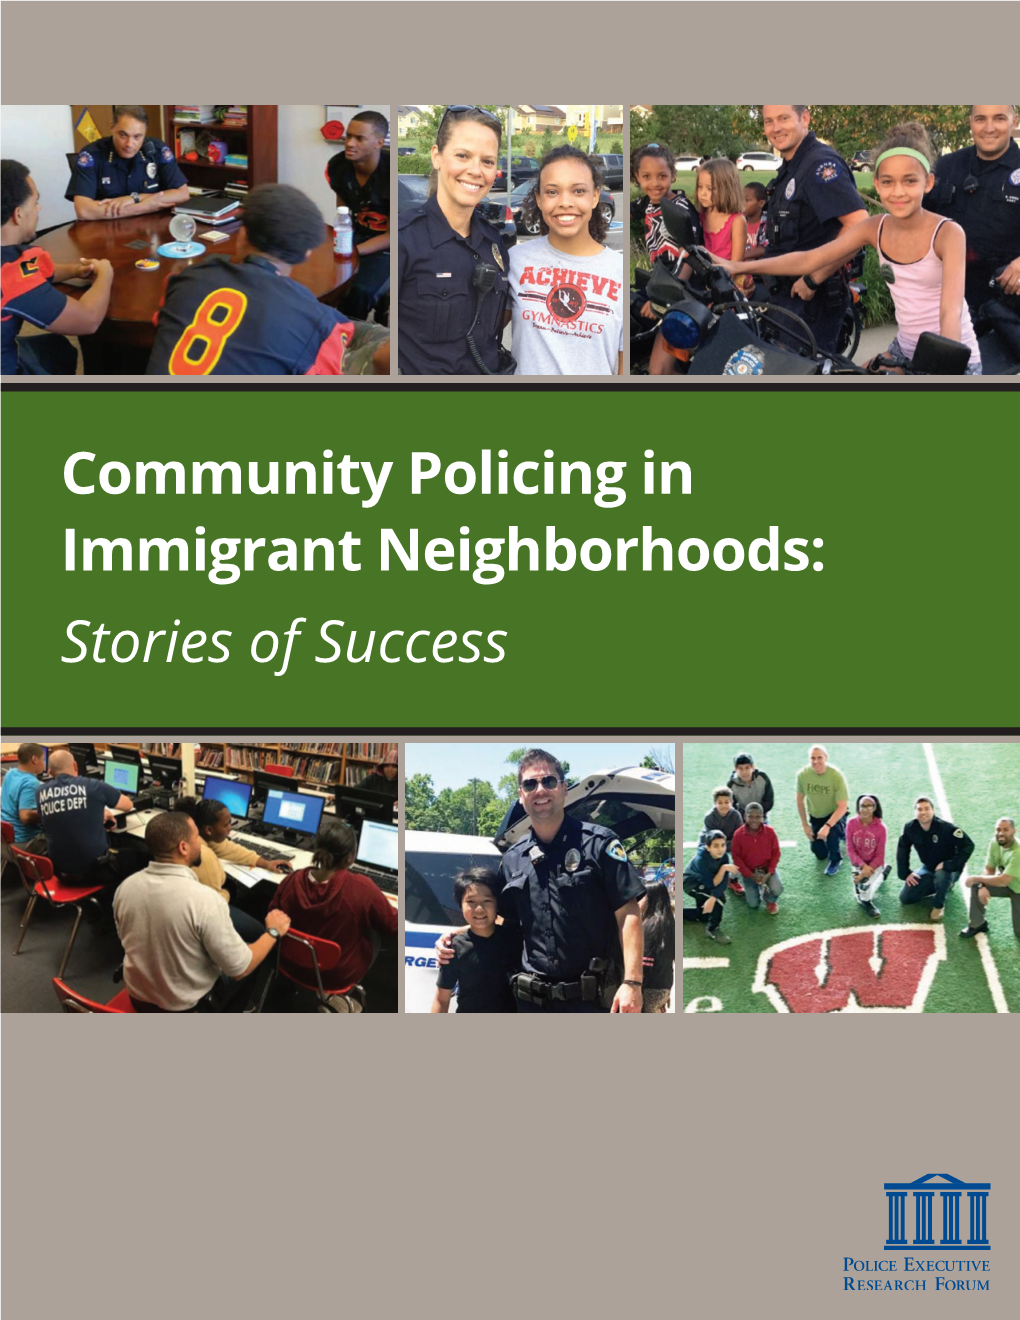 Community Policing in Immigrant Neighborhoods: Stories of Success